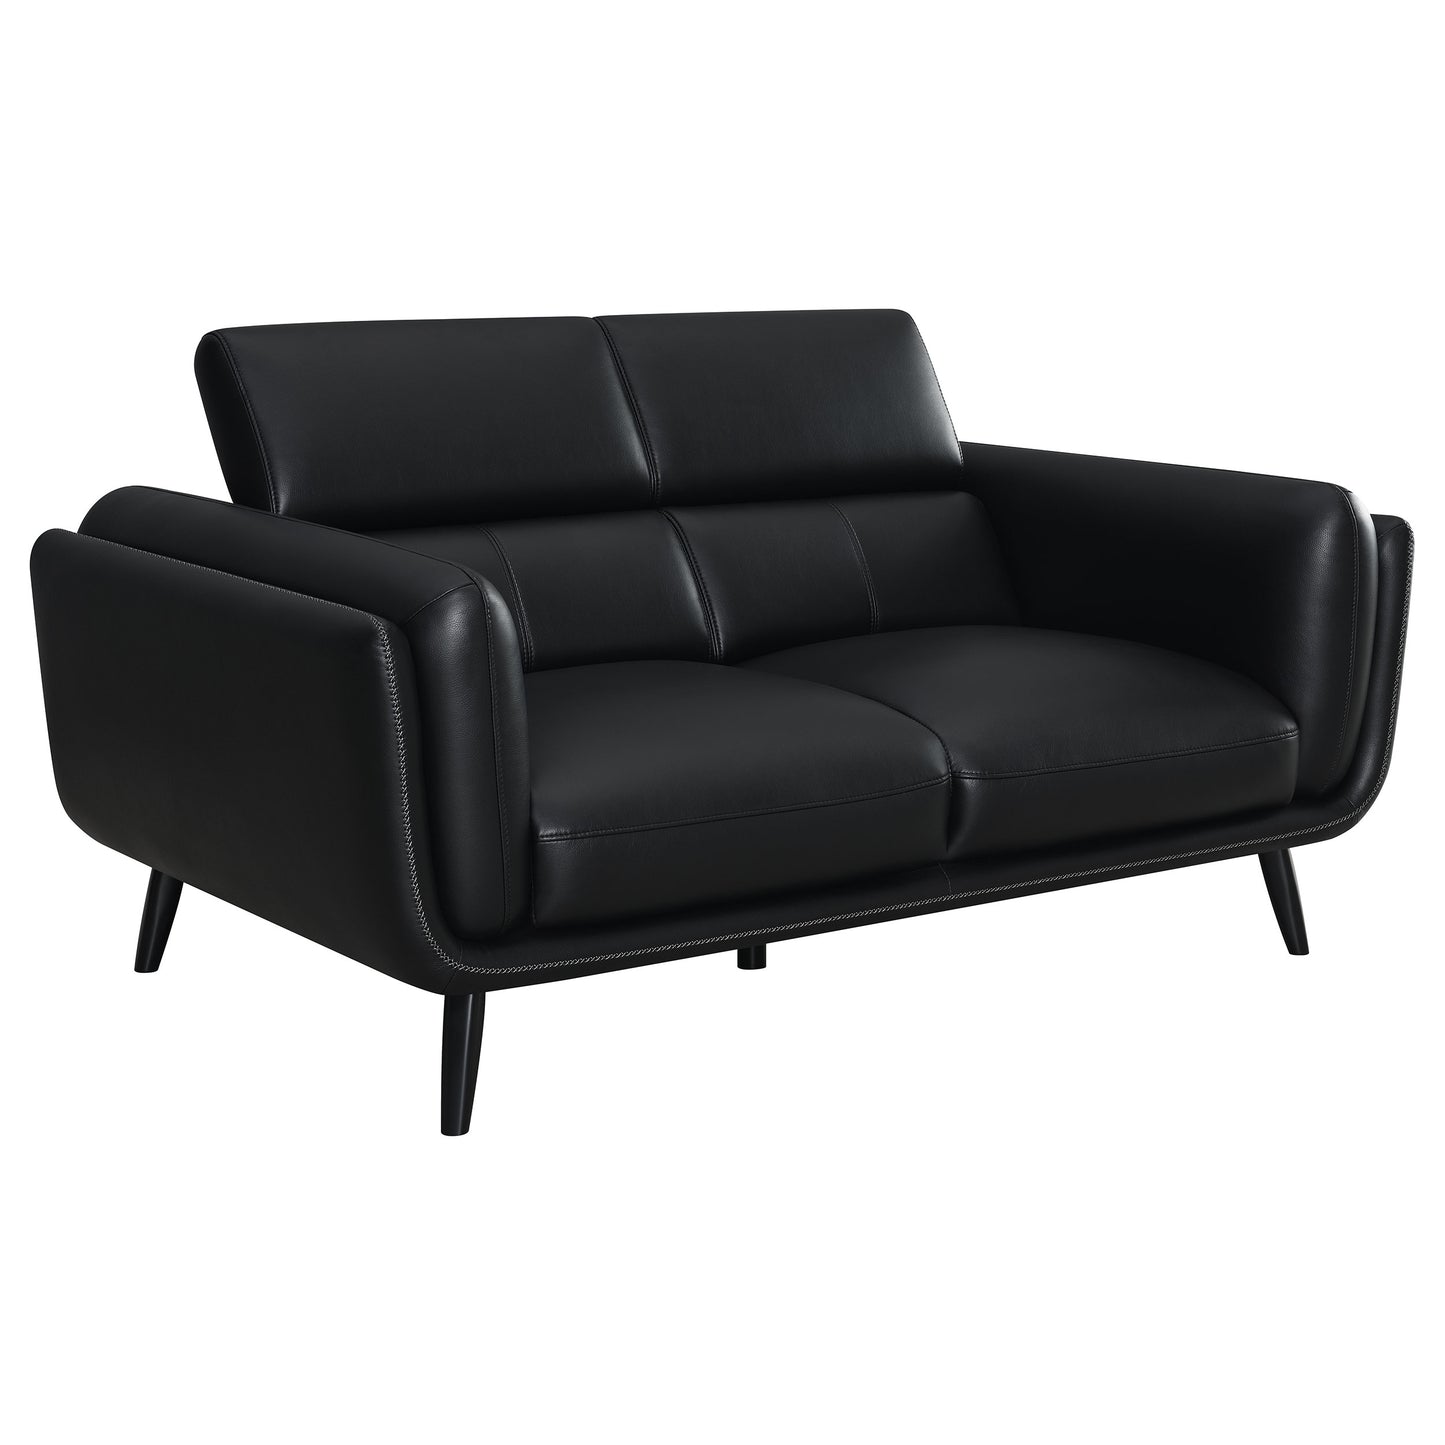 Shania Track Arms Loveseat with Tapered Legs Black